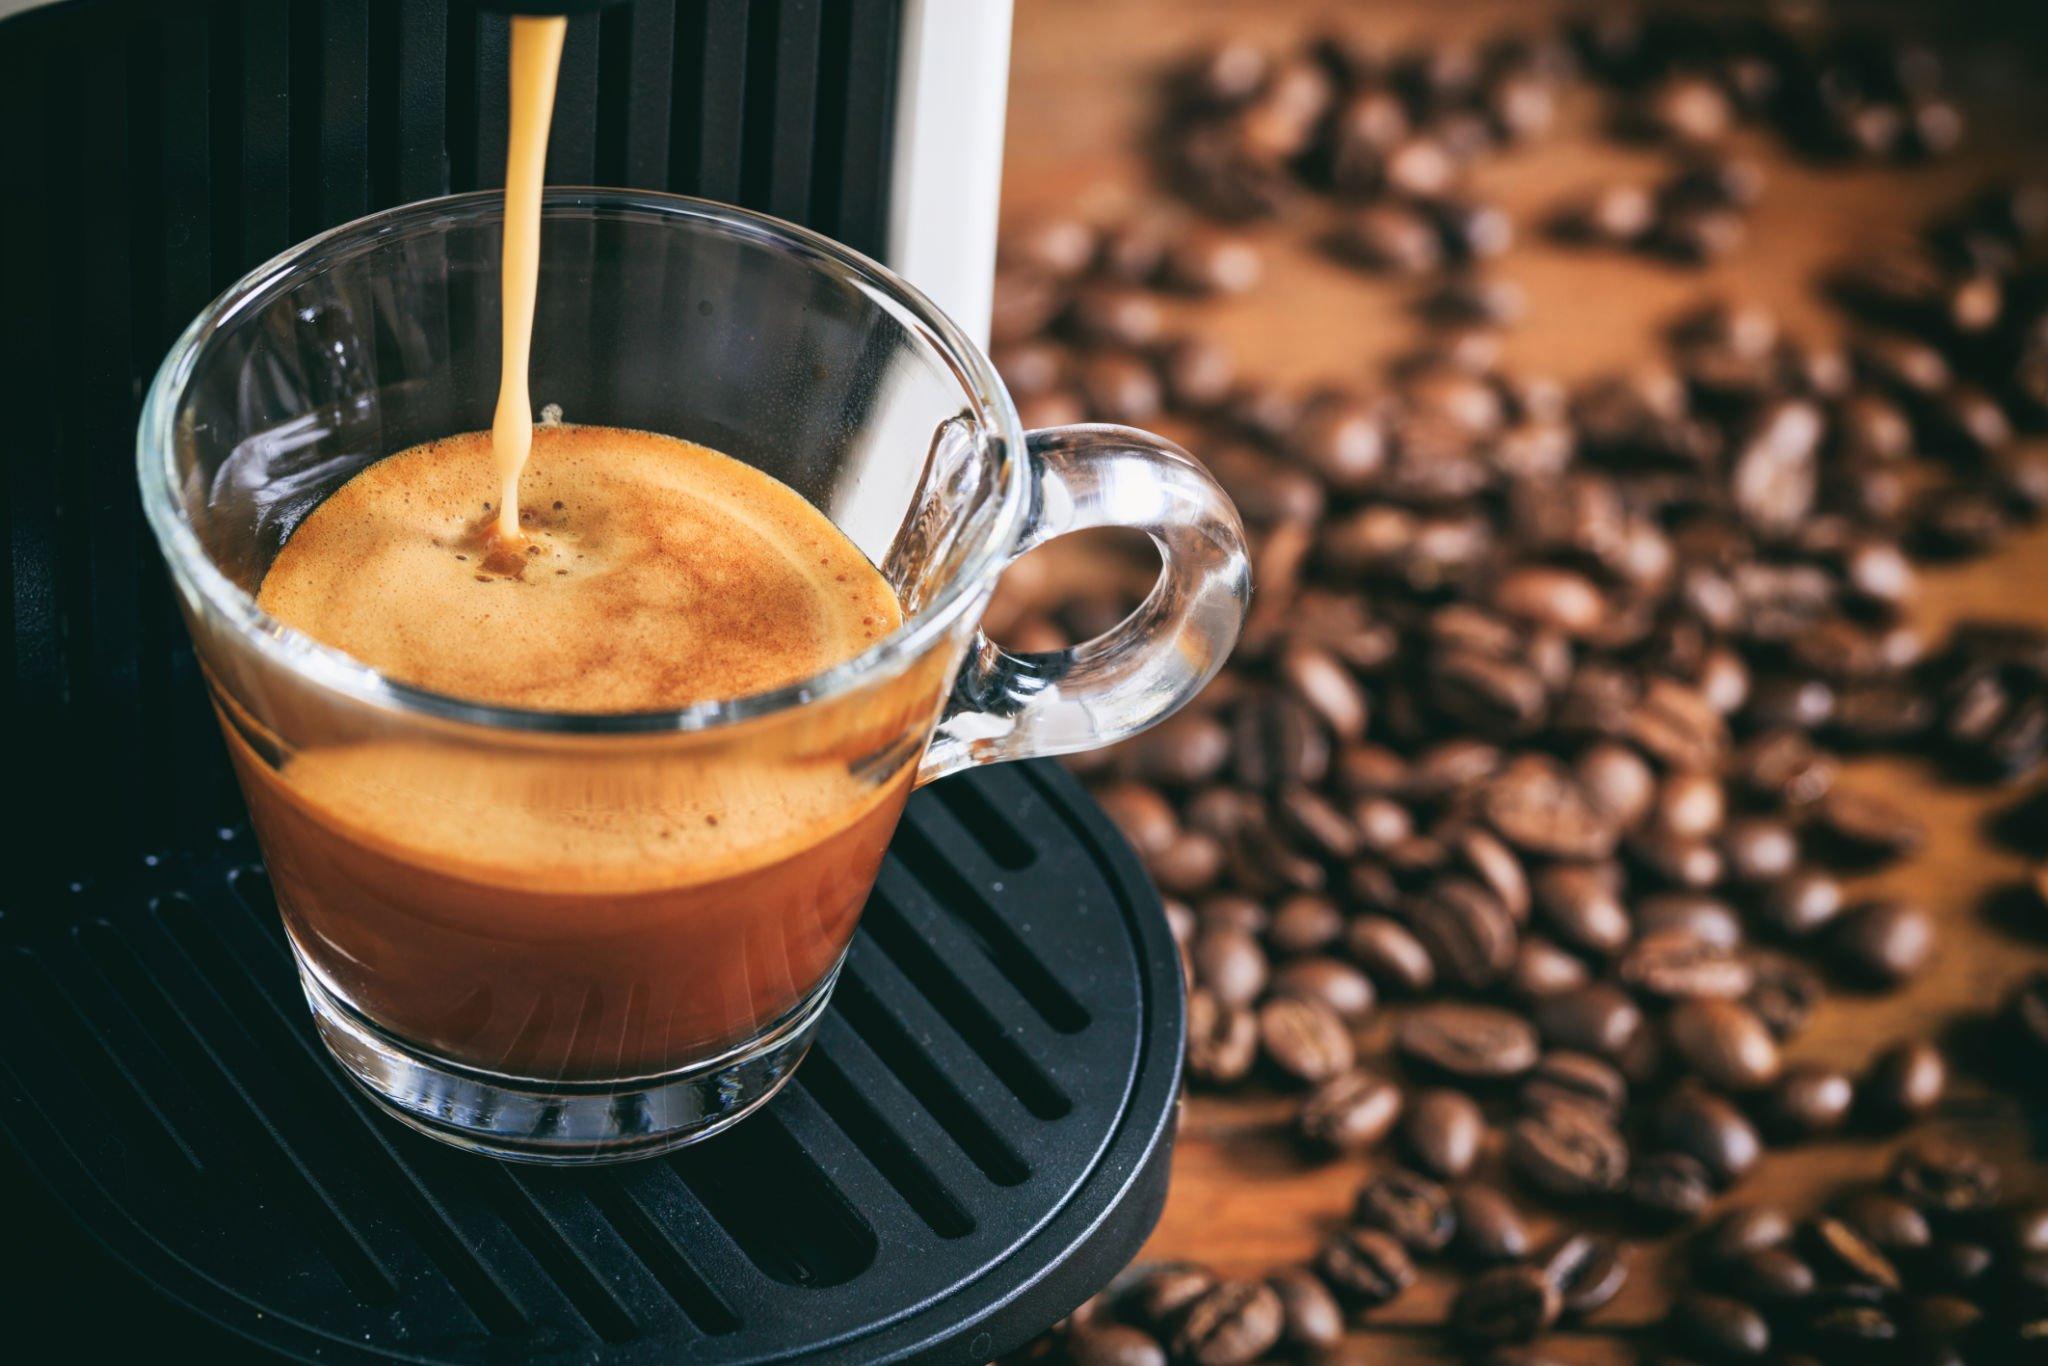 Do you know the difference between an Americano and Espresso?